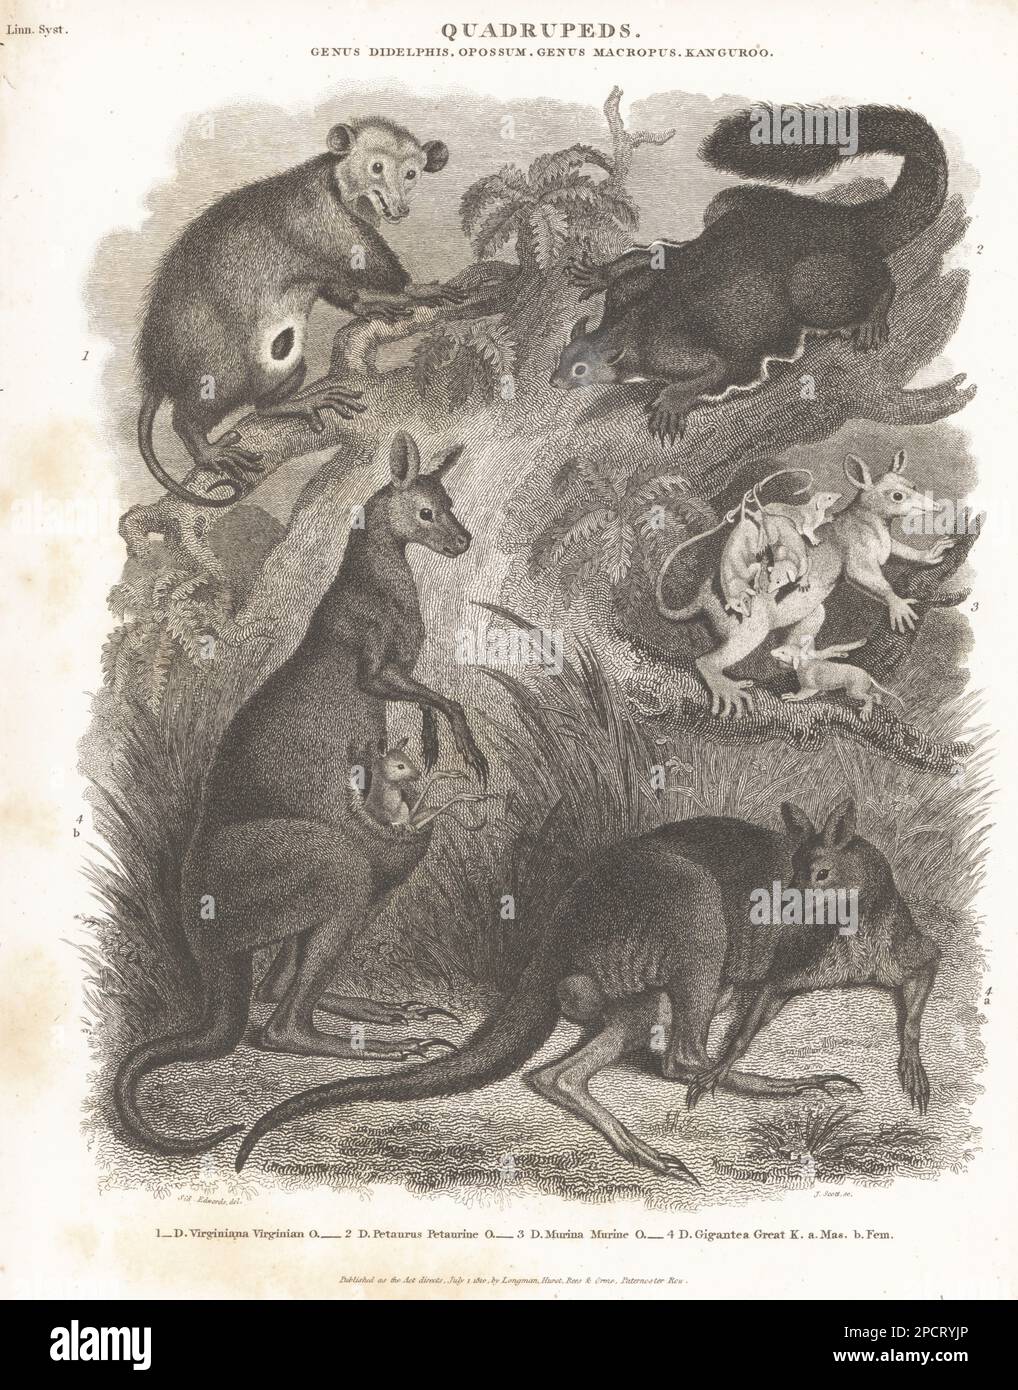 North American opossum, Didelphis virginiana 1, yellow-bellied glider, Petaurus australis 2, Linnaeus's mouse opossum with young, Marmosa murina 3, and eastern grey kangaroo, Macropus giganteus, male and female with joey 4. Copperplate engraving by J. Scott after Sydenham Edwards from Abraham Rees' Cyclopedia or Universal Dictionary of Arts, Sciences and Literature, Longman, Hurst, Rees, Orme, Paternoster Row, London, July 1, 1810. Stock Photo